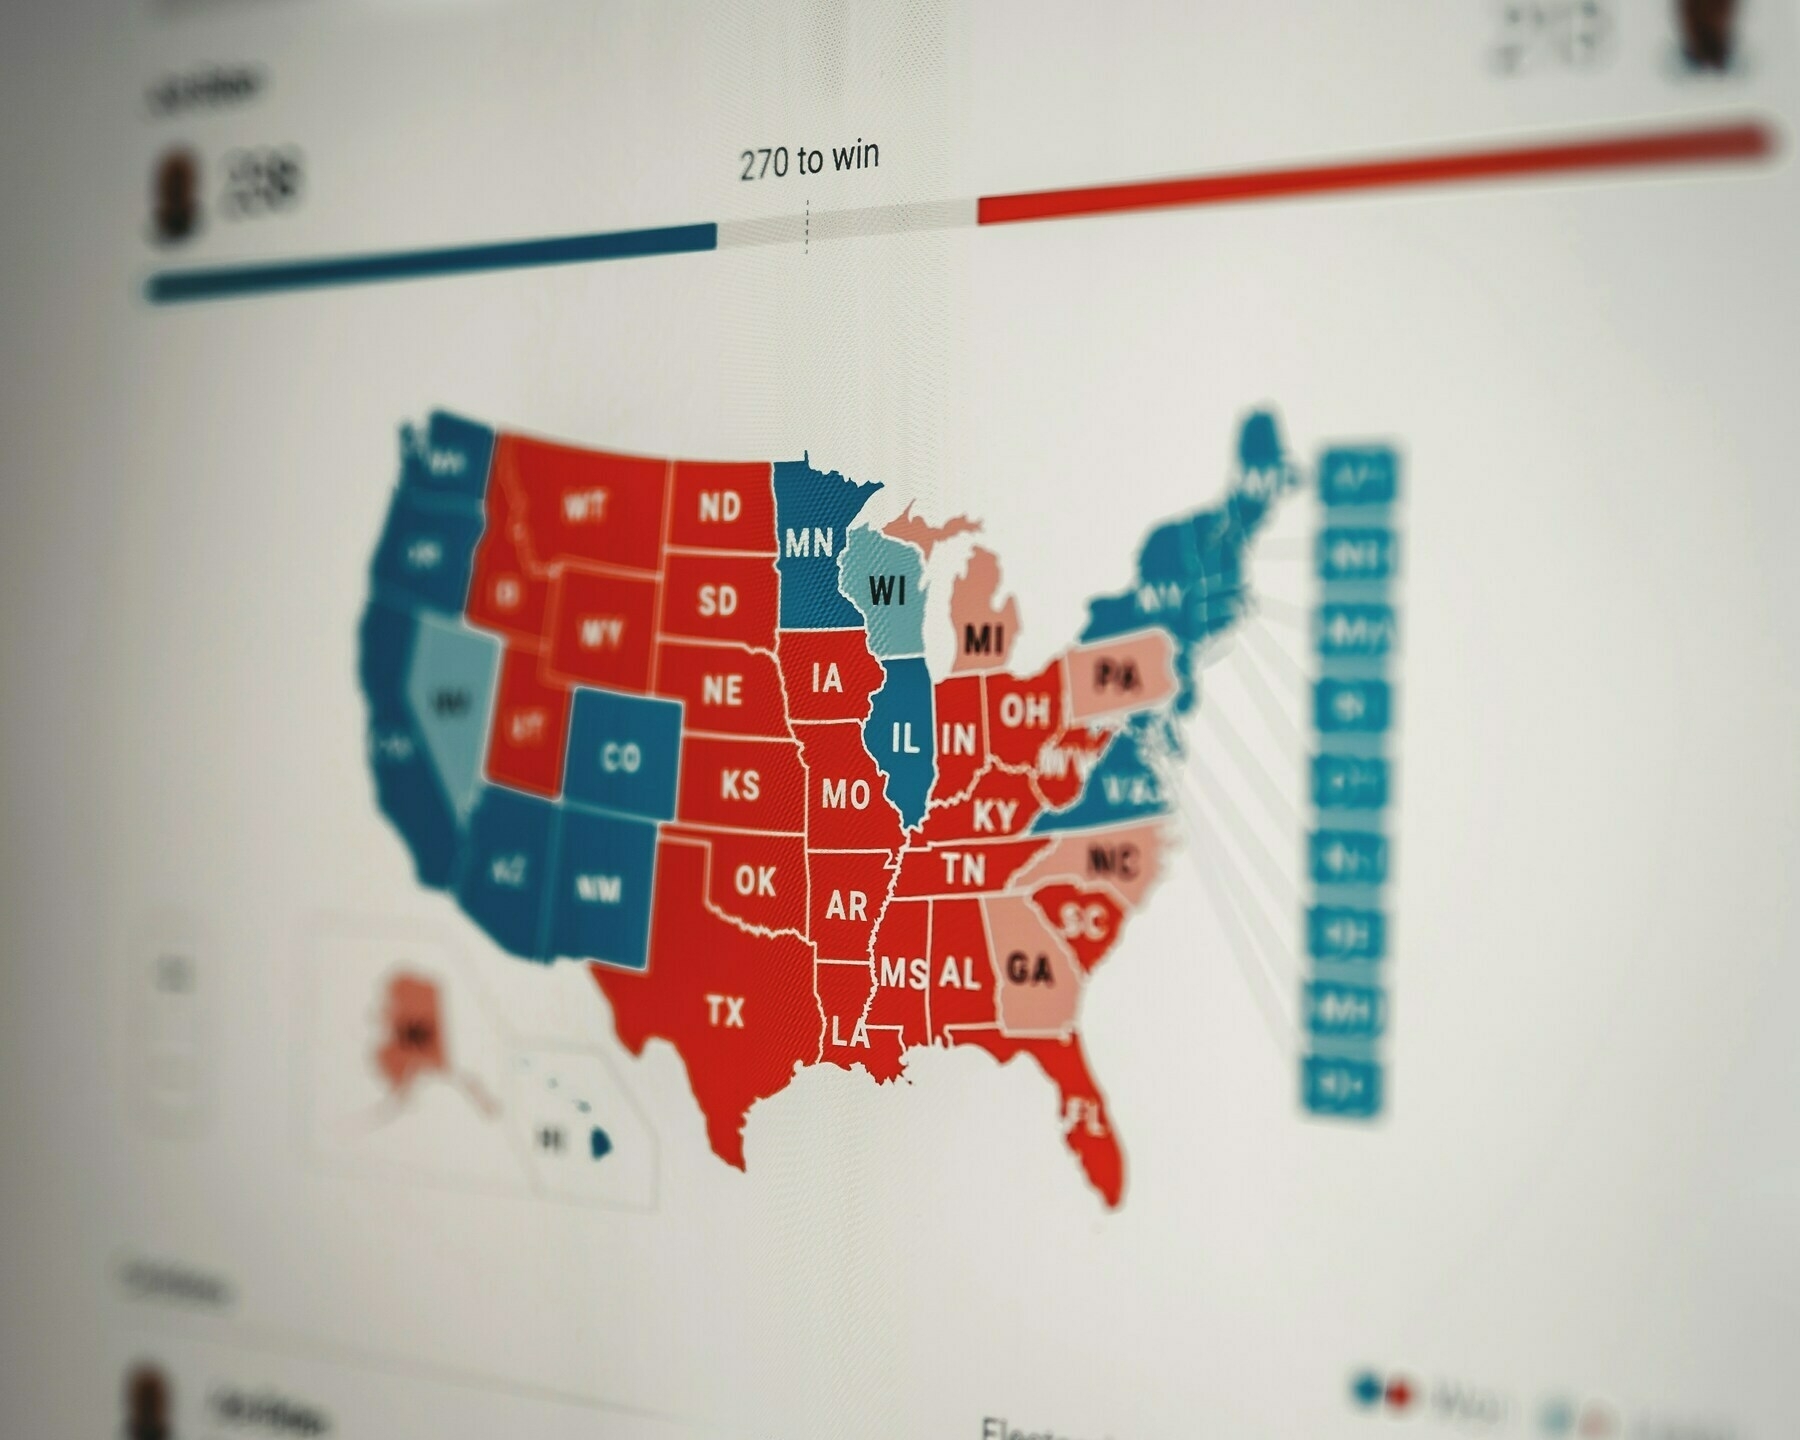 a political map of the United States showing red and blue states representing Republicans and Democrats